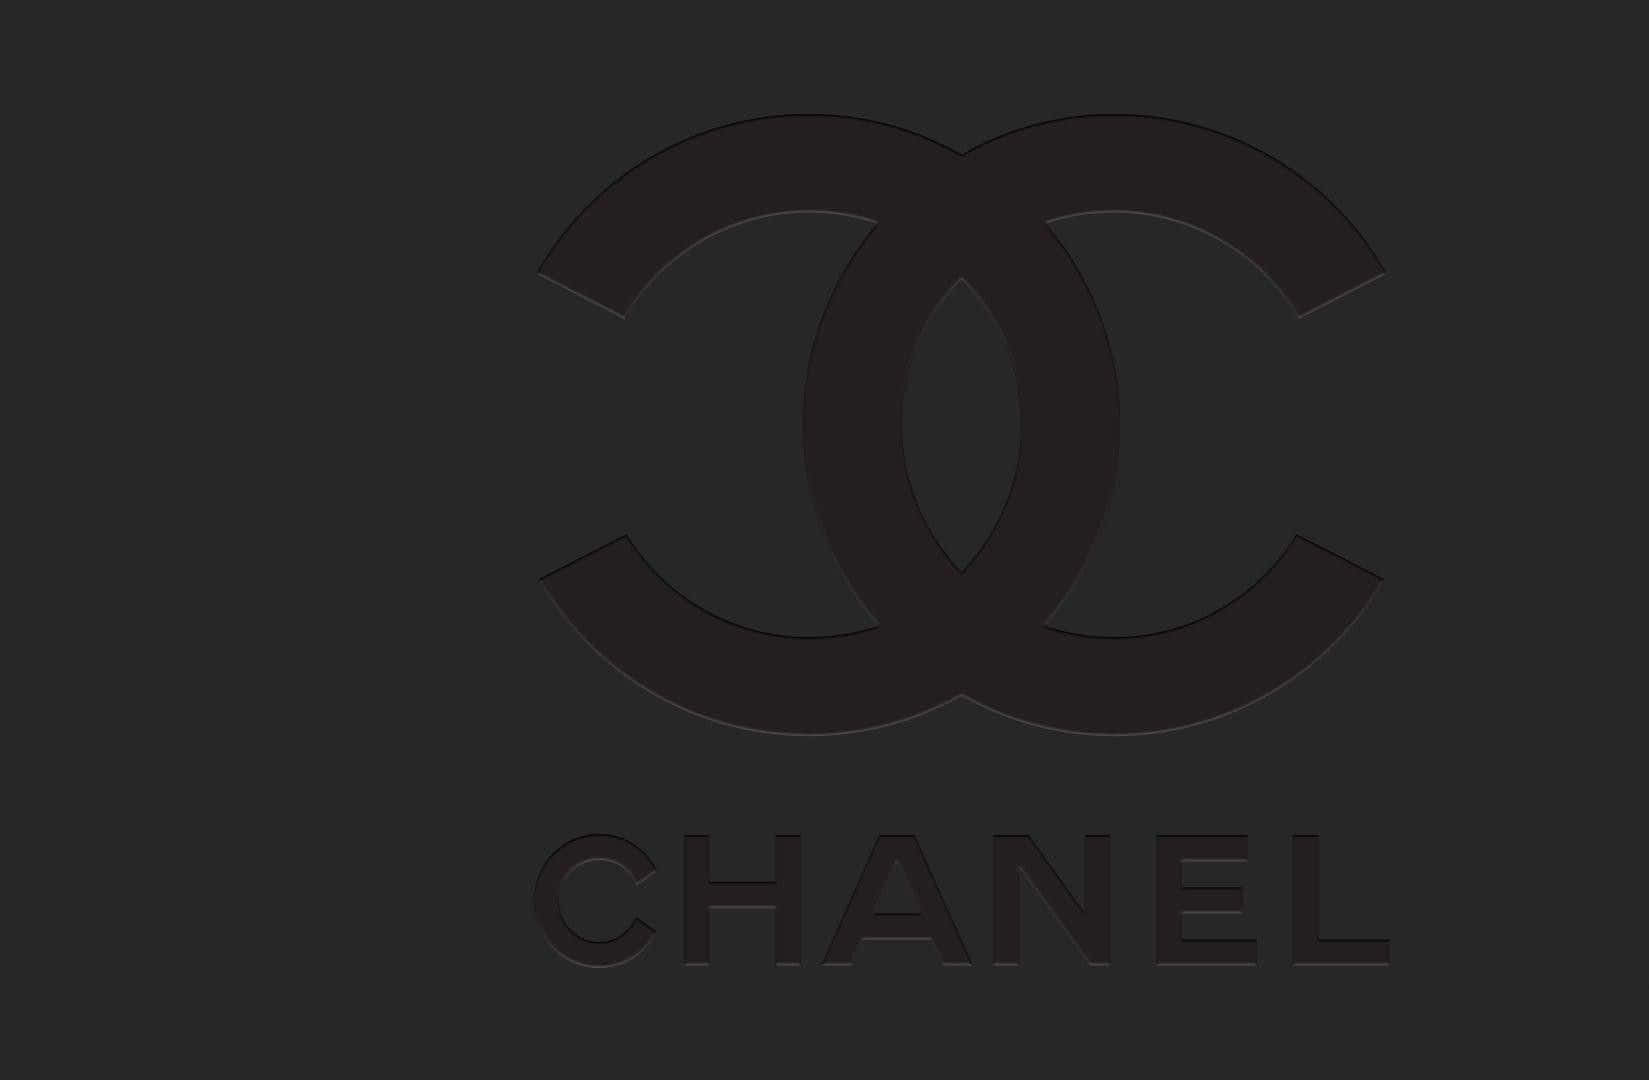 The famous logo of the luxury fashion house, Chanel.